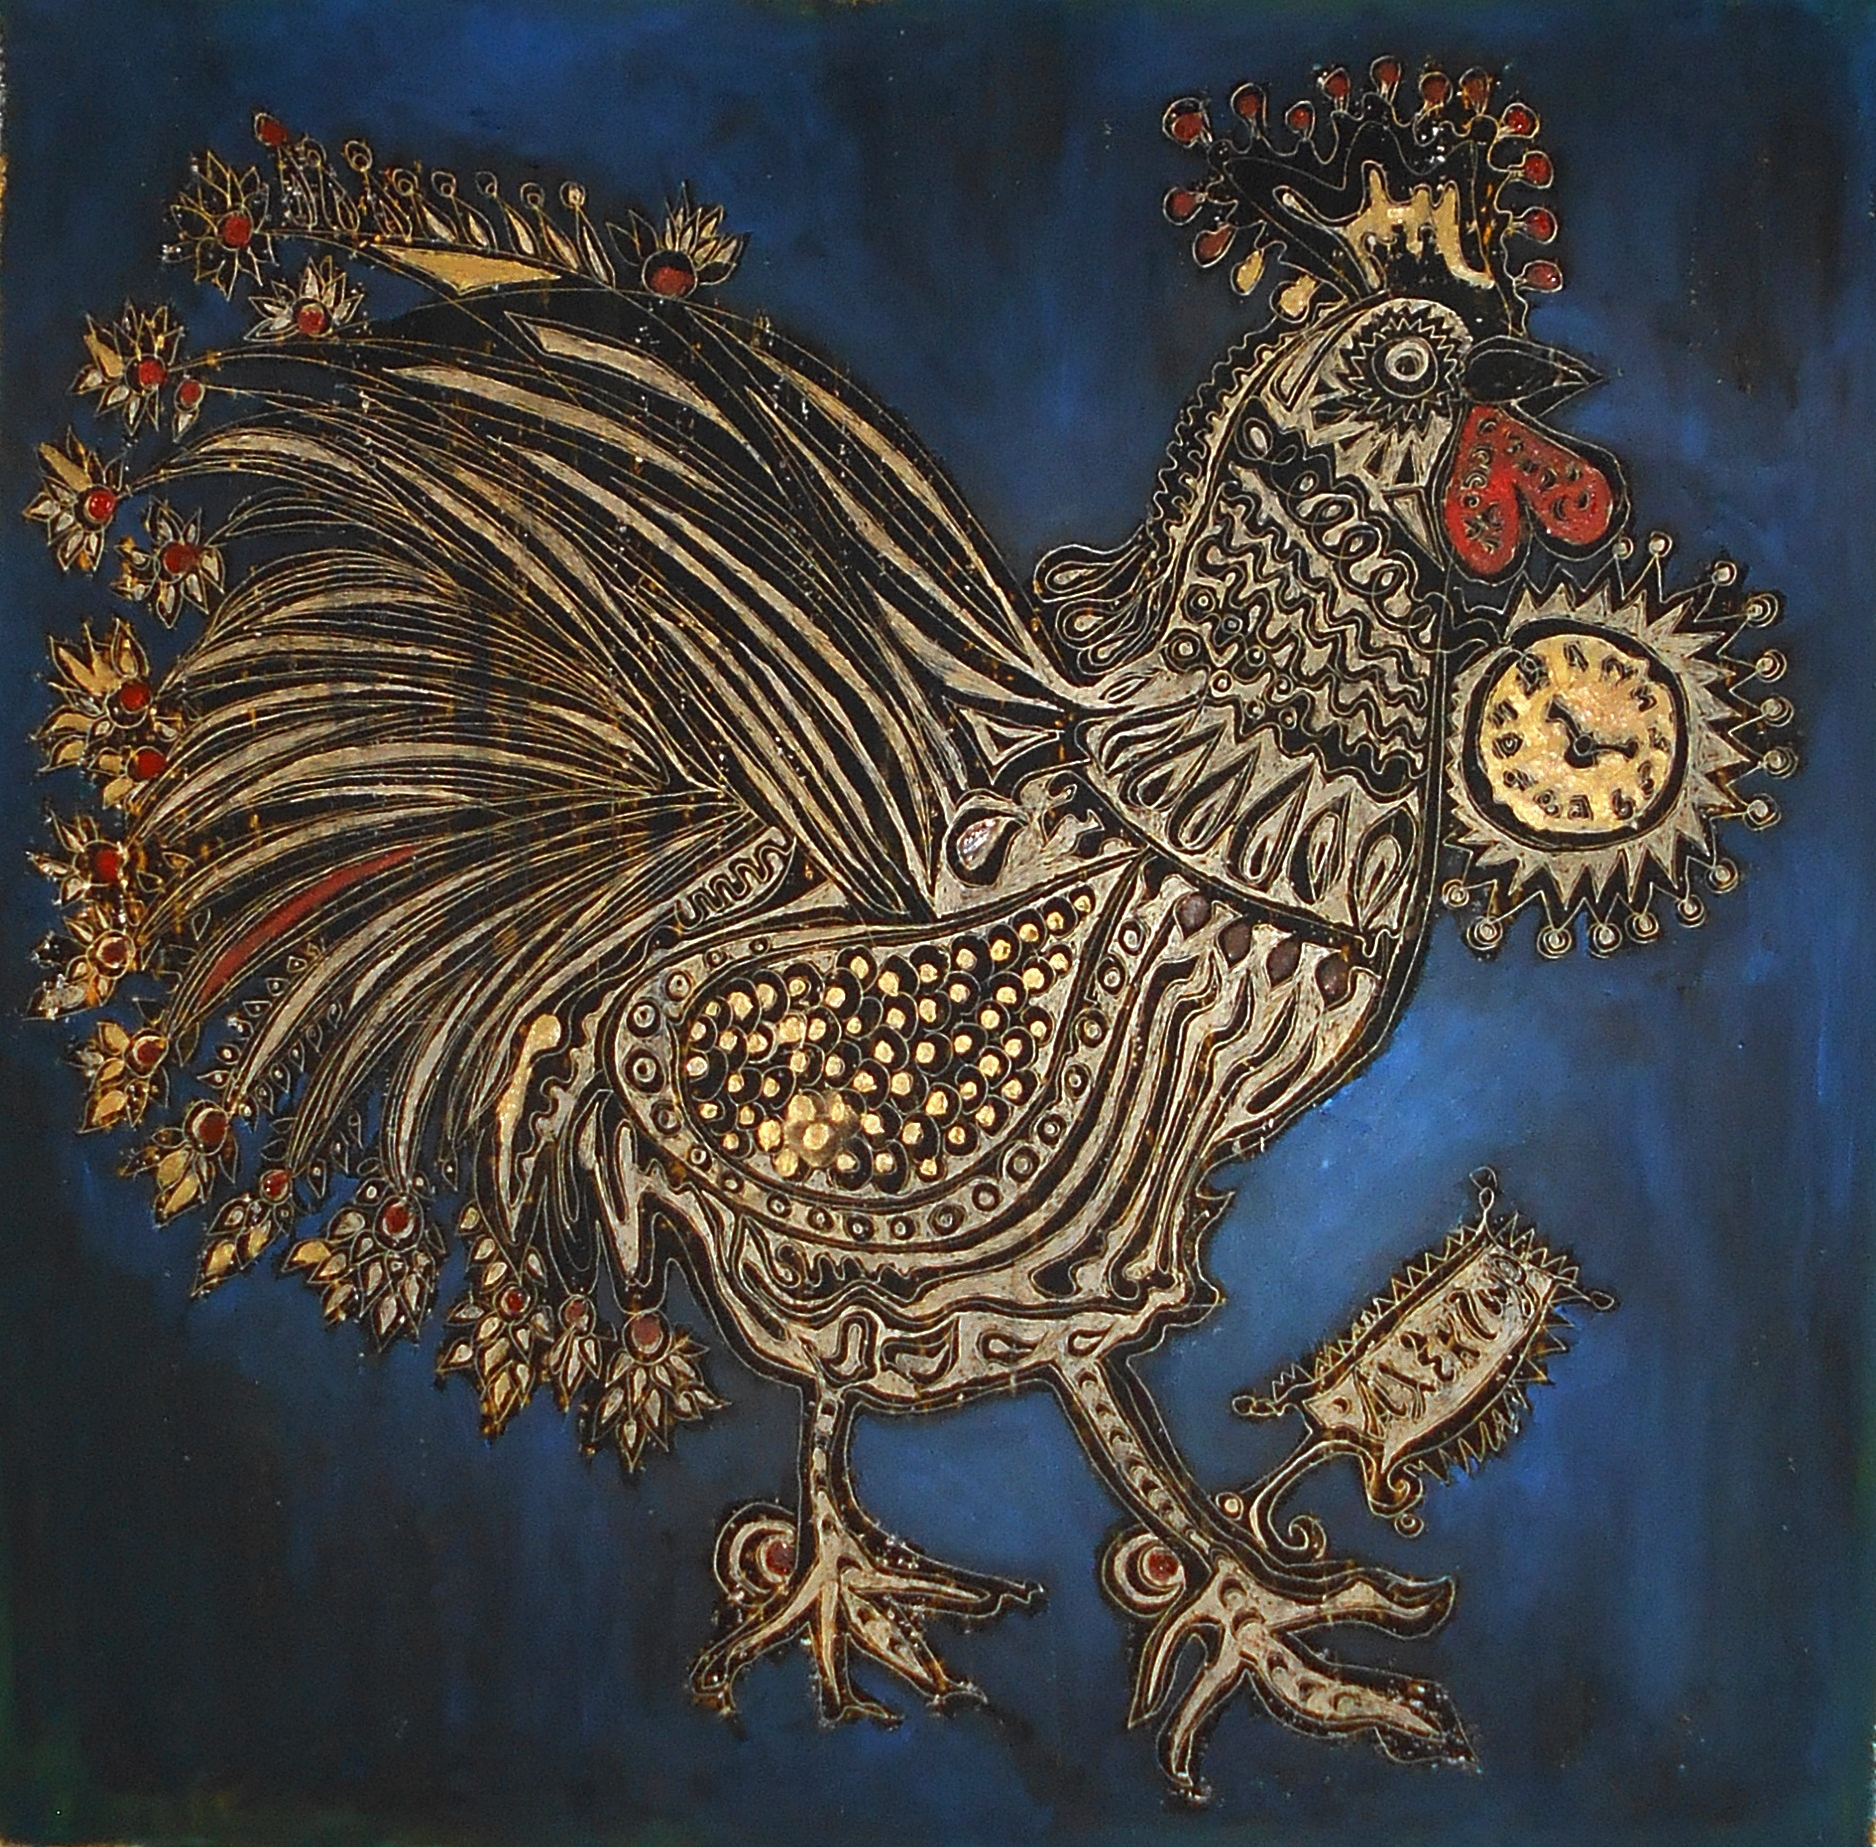 The Rooster, 70x70, Mixed media on cardboard, 2020